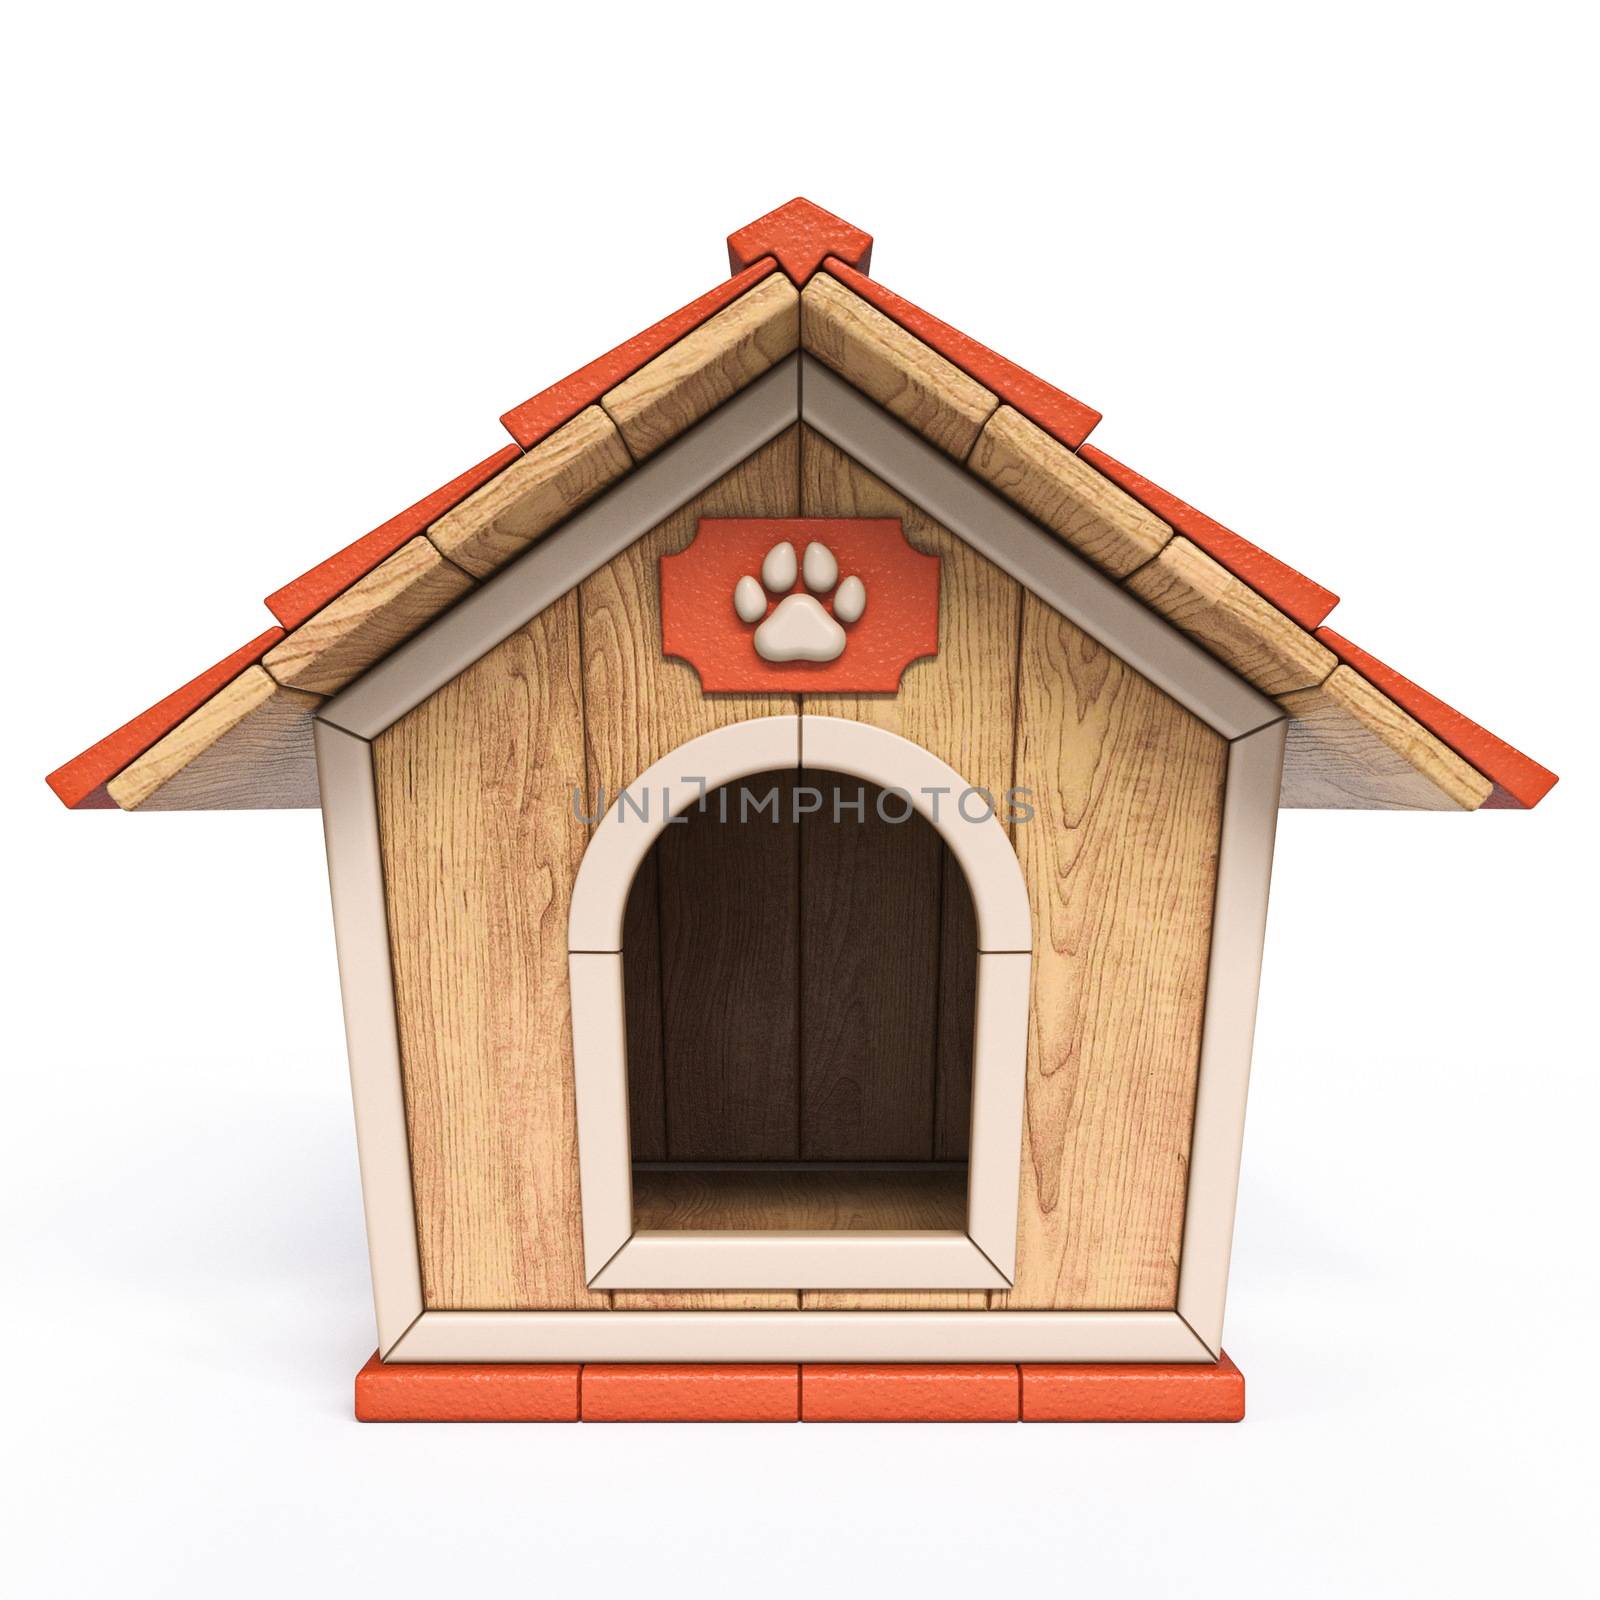 Wooden dog house Front view 3D render illustration isolated on white background